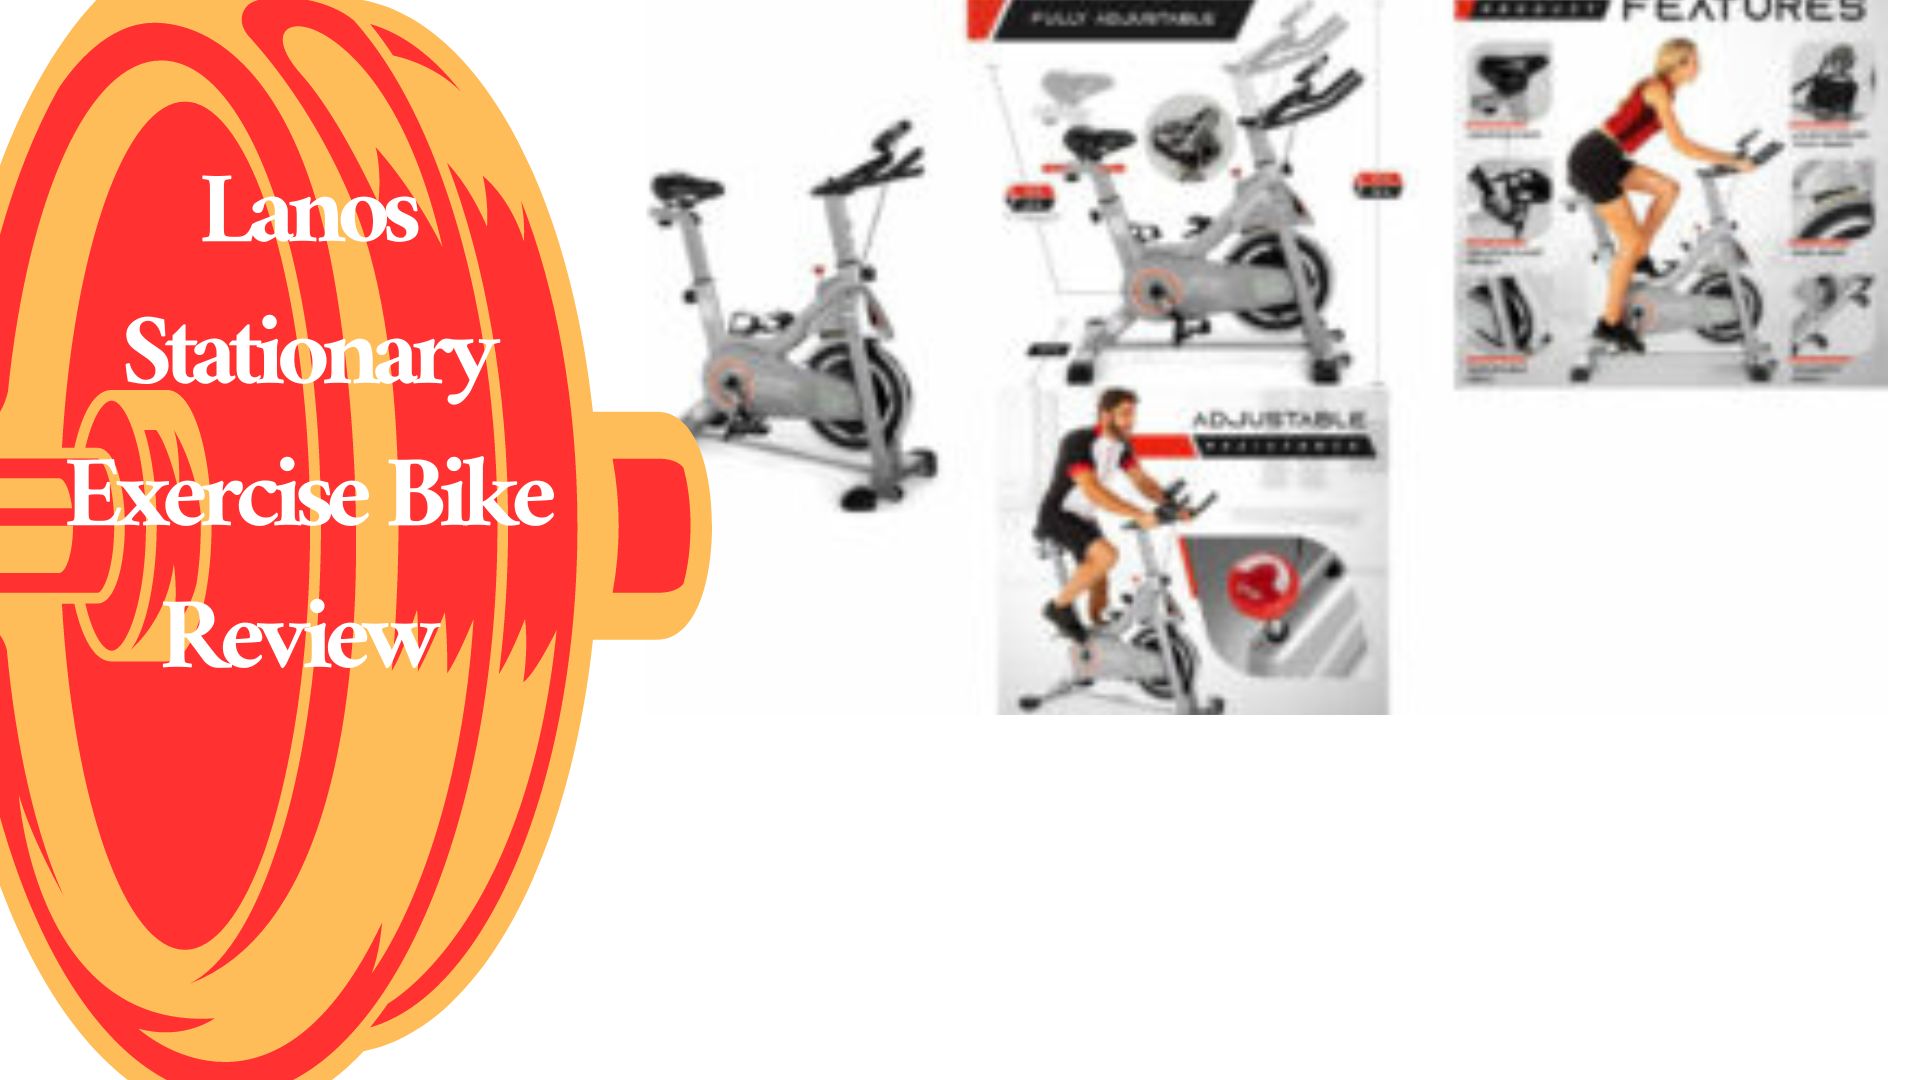 Lanos Stationary Exercise Bike Review